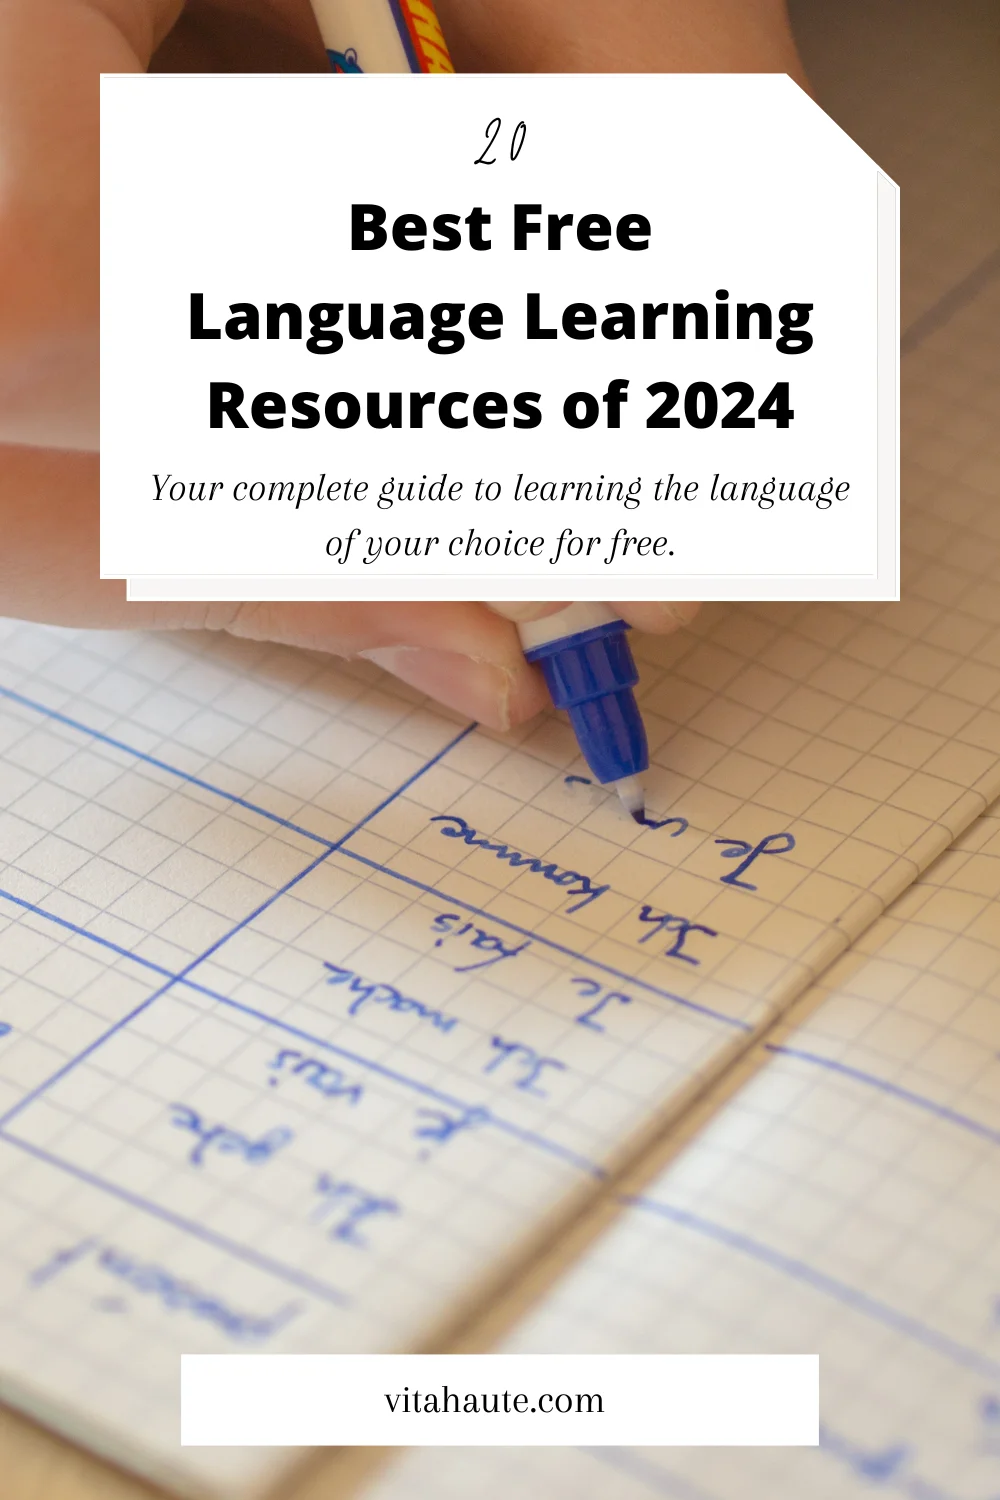 A list of free language learning resources on the internet